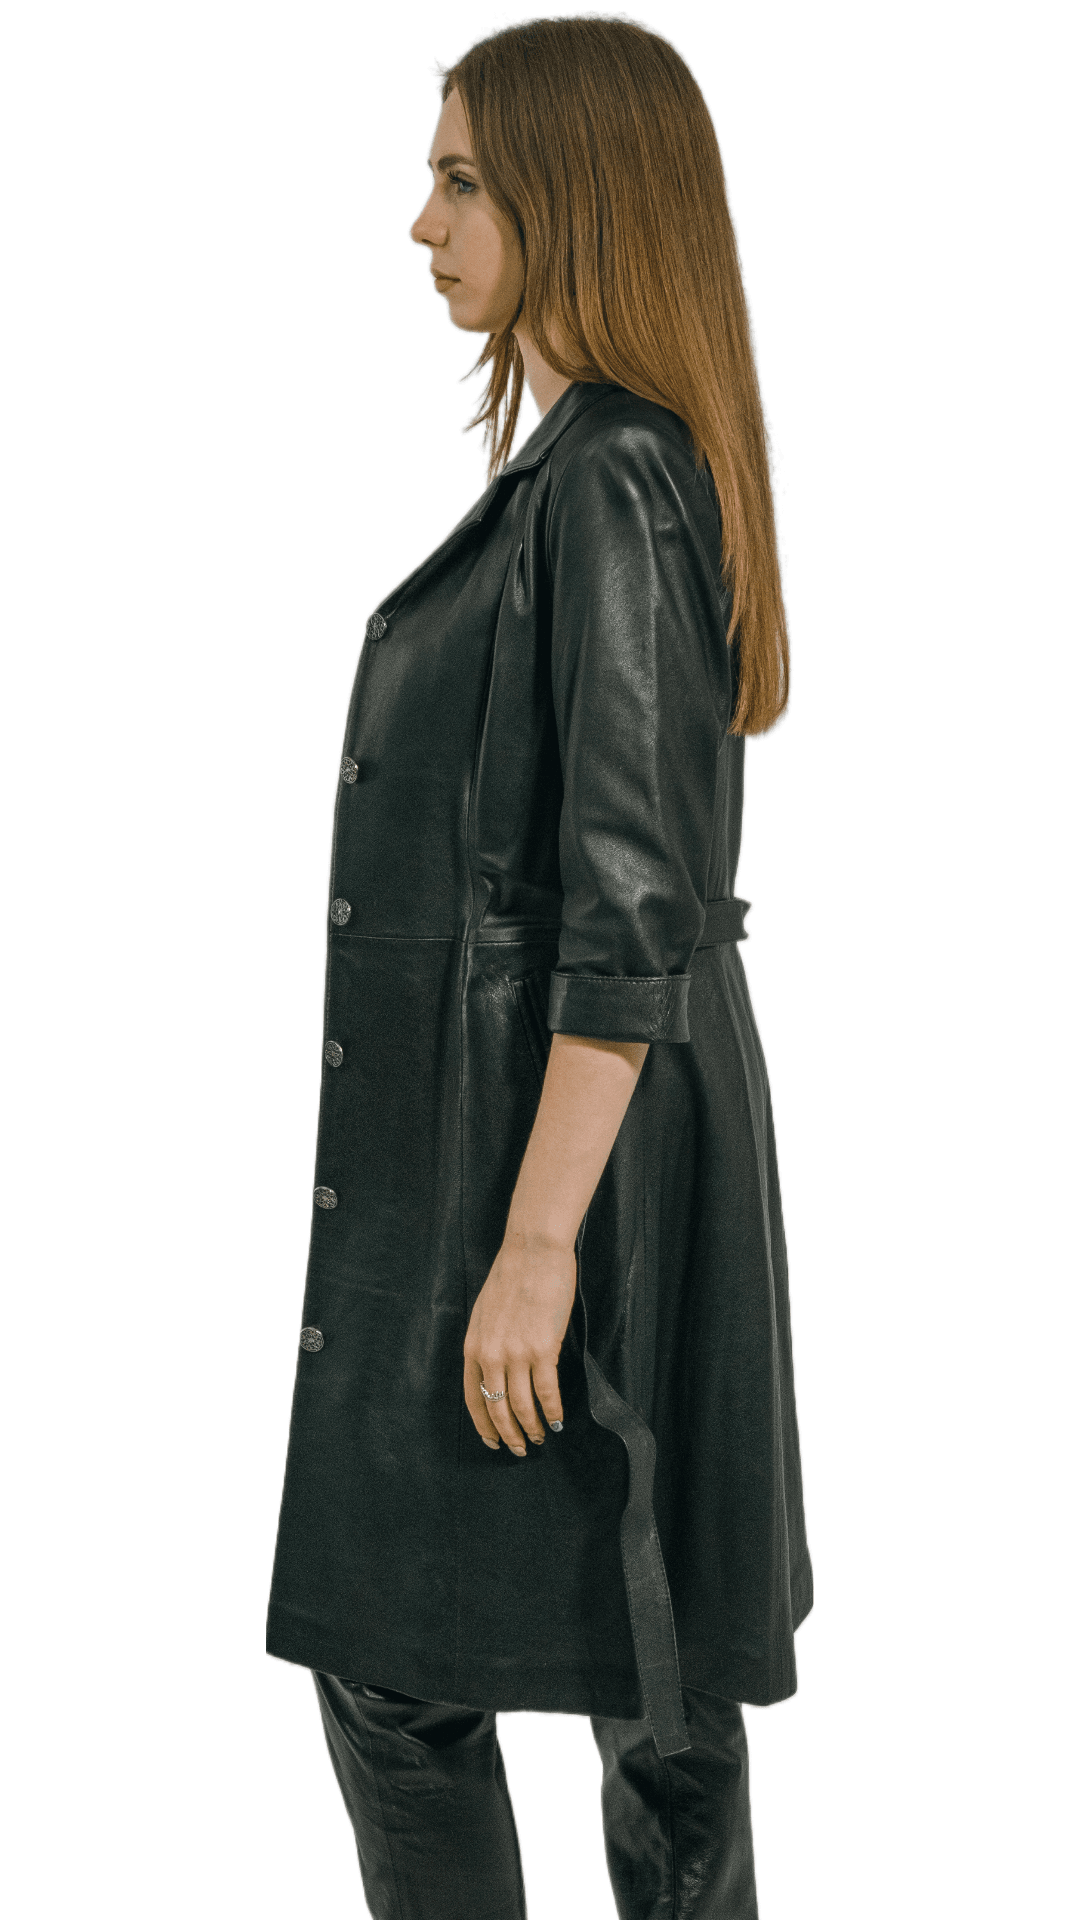  Buttoned Black Genuine Leather Dress Half Sleeve Trench Coat for Women Diana